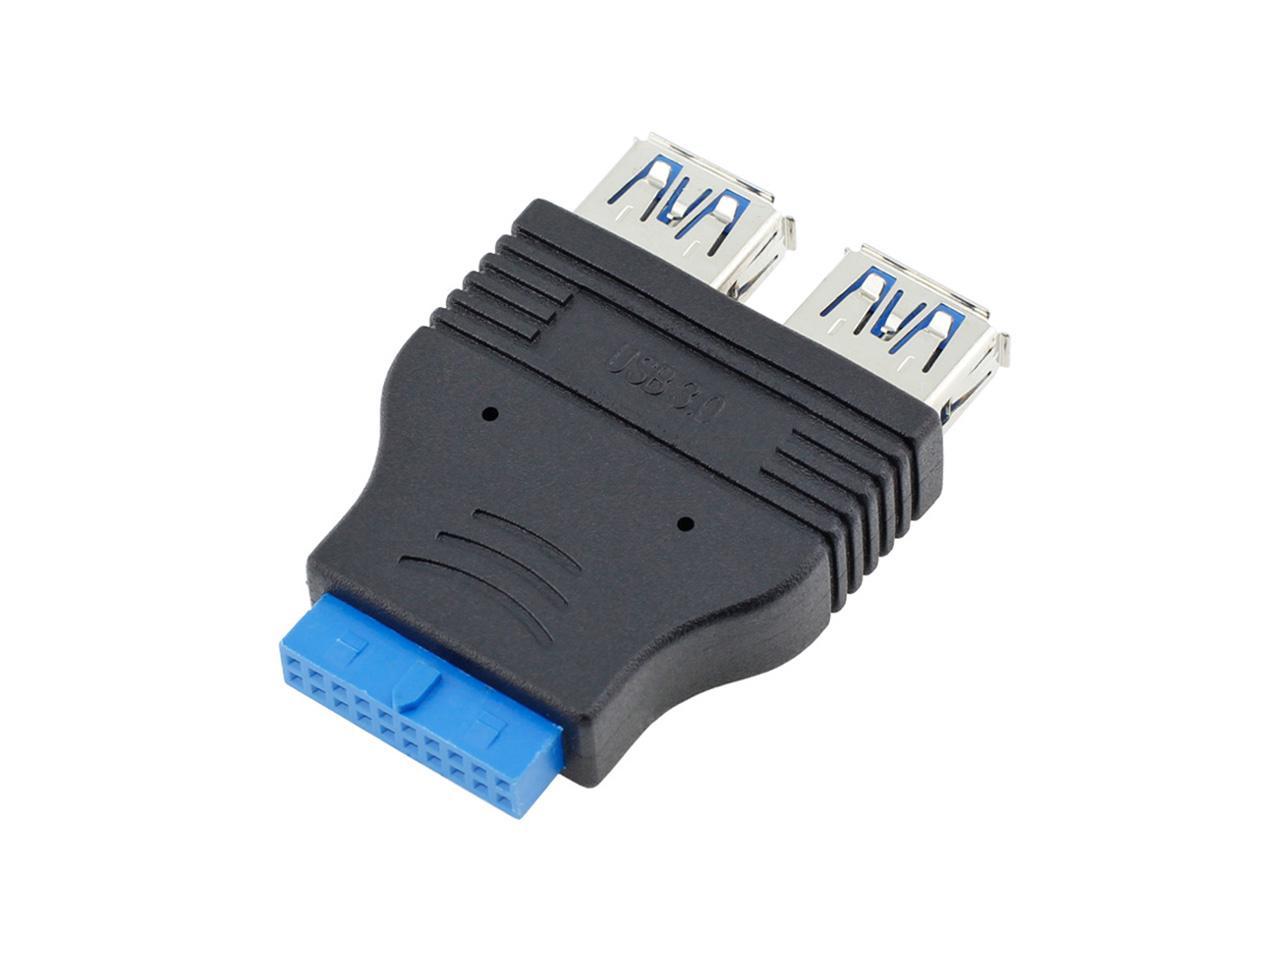 2Port USB 3.0 Female to 20 Pin Header Motherboard Cable Internal Connection EC 